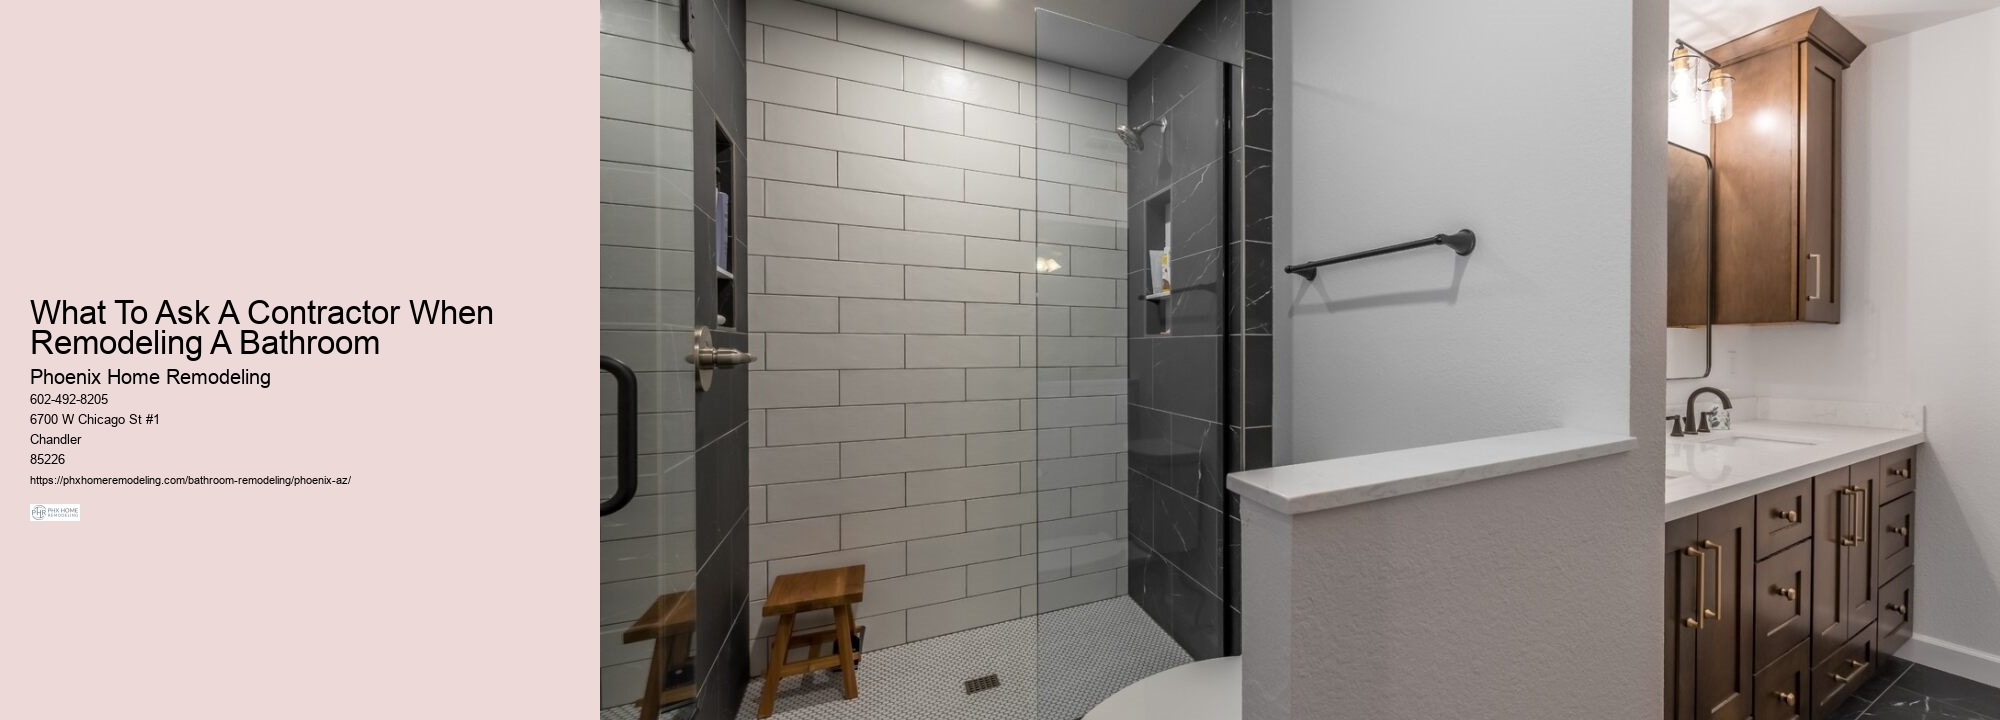 What To Ask A Contractor When Remodeling A Bathroom